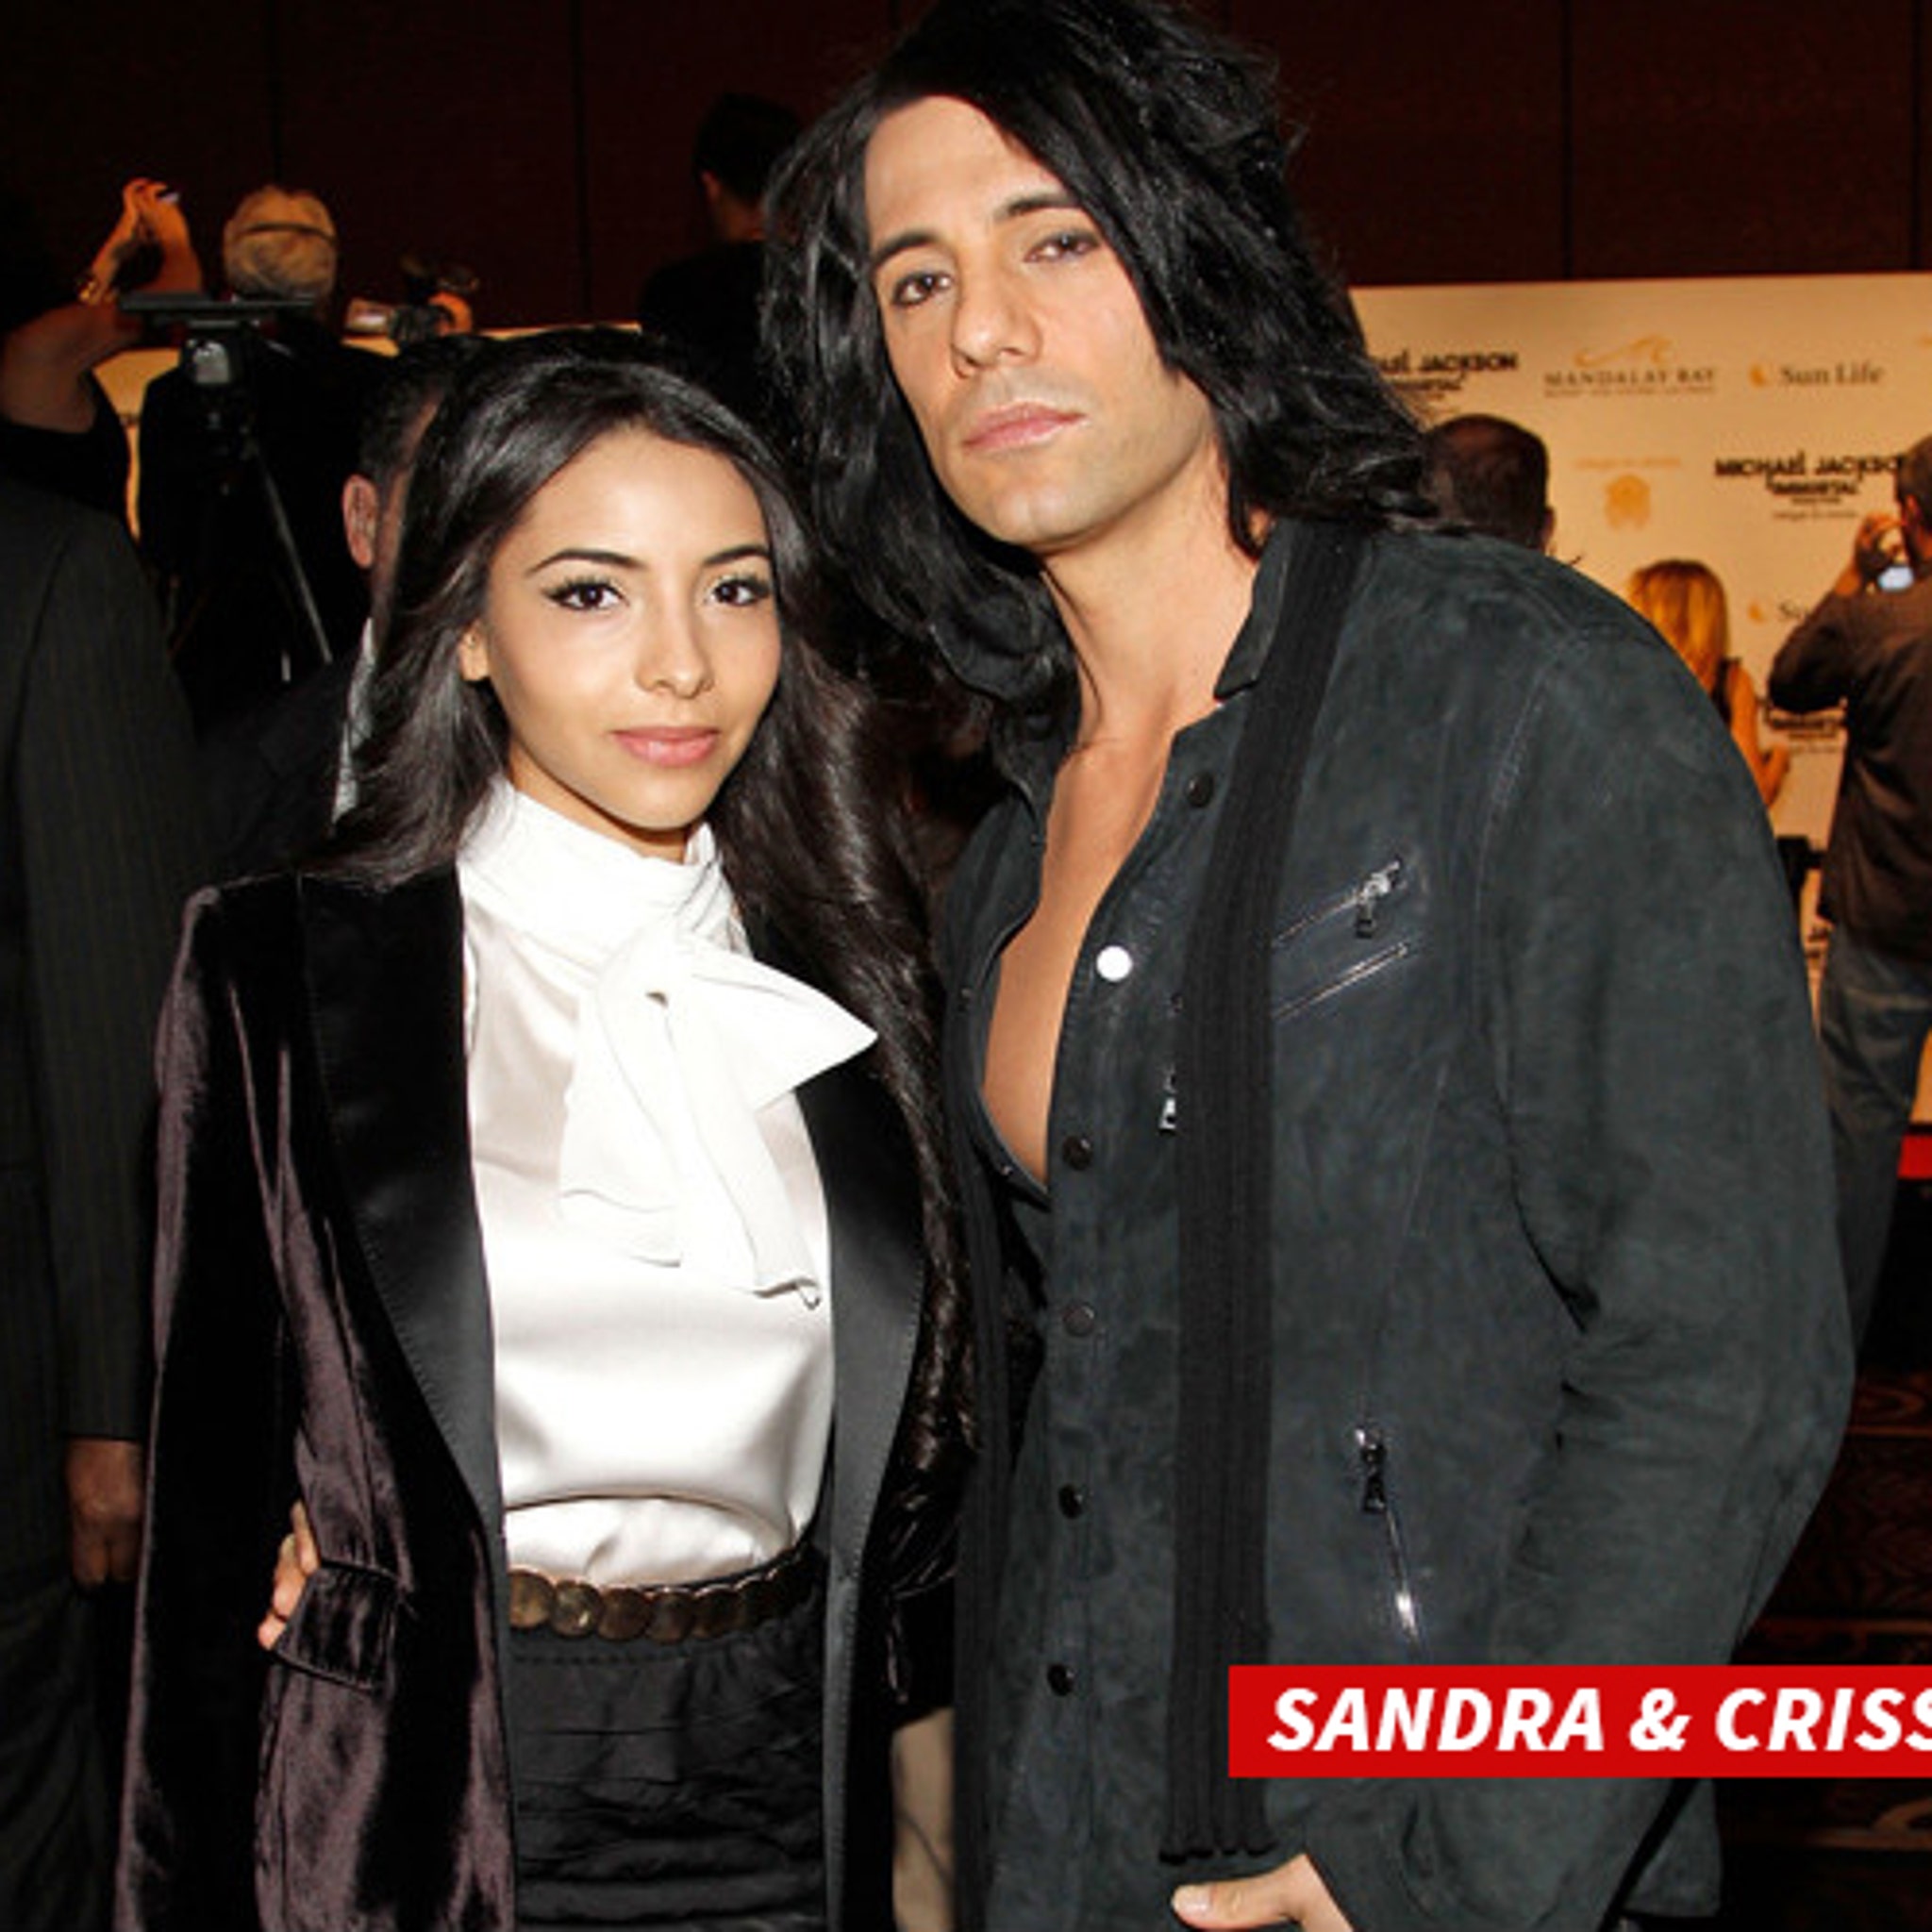 criss angel and his wife